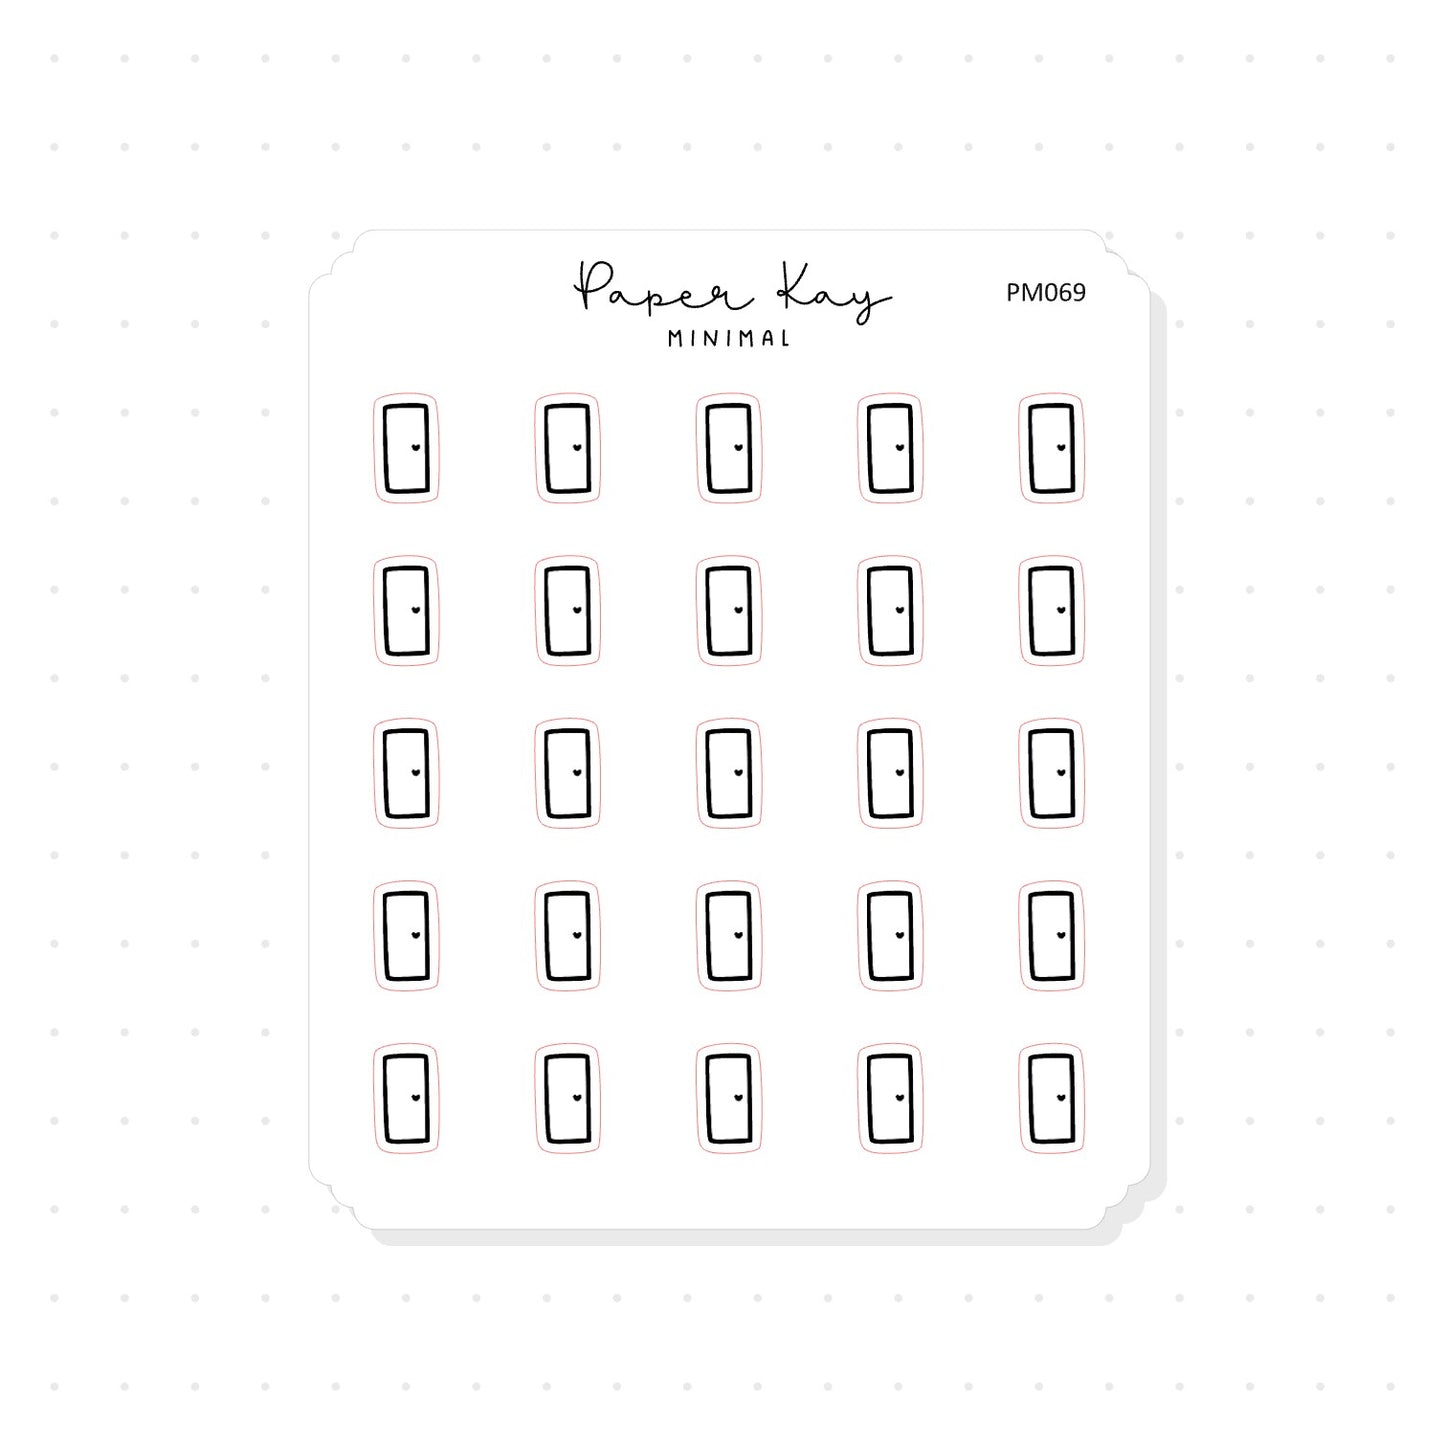 (PM069) Hobonichi/PP Weeks Weekly Planner - Tiny Minimal Icon Stickers